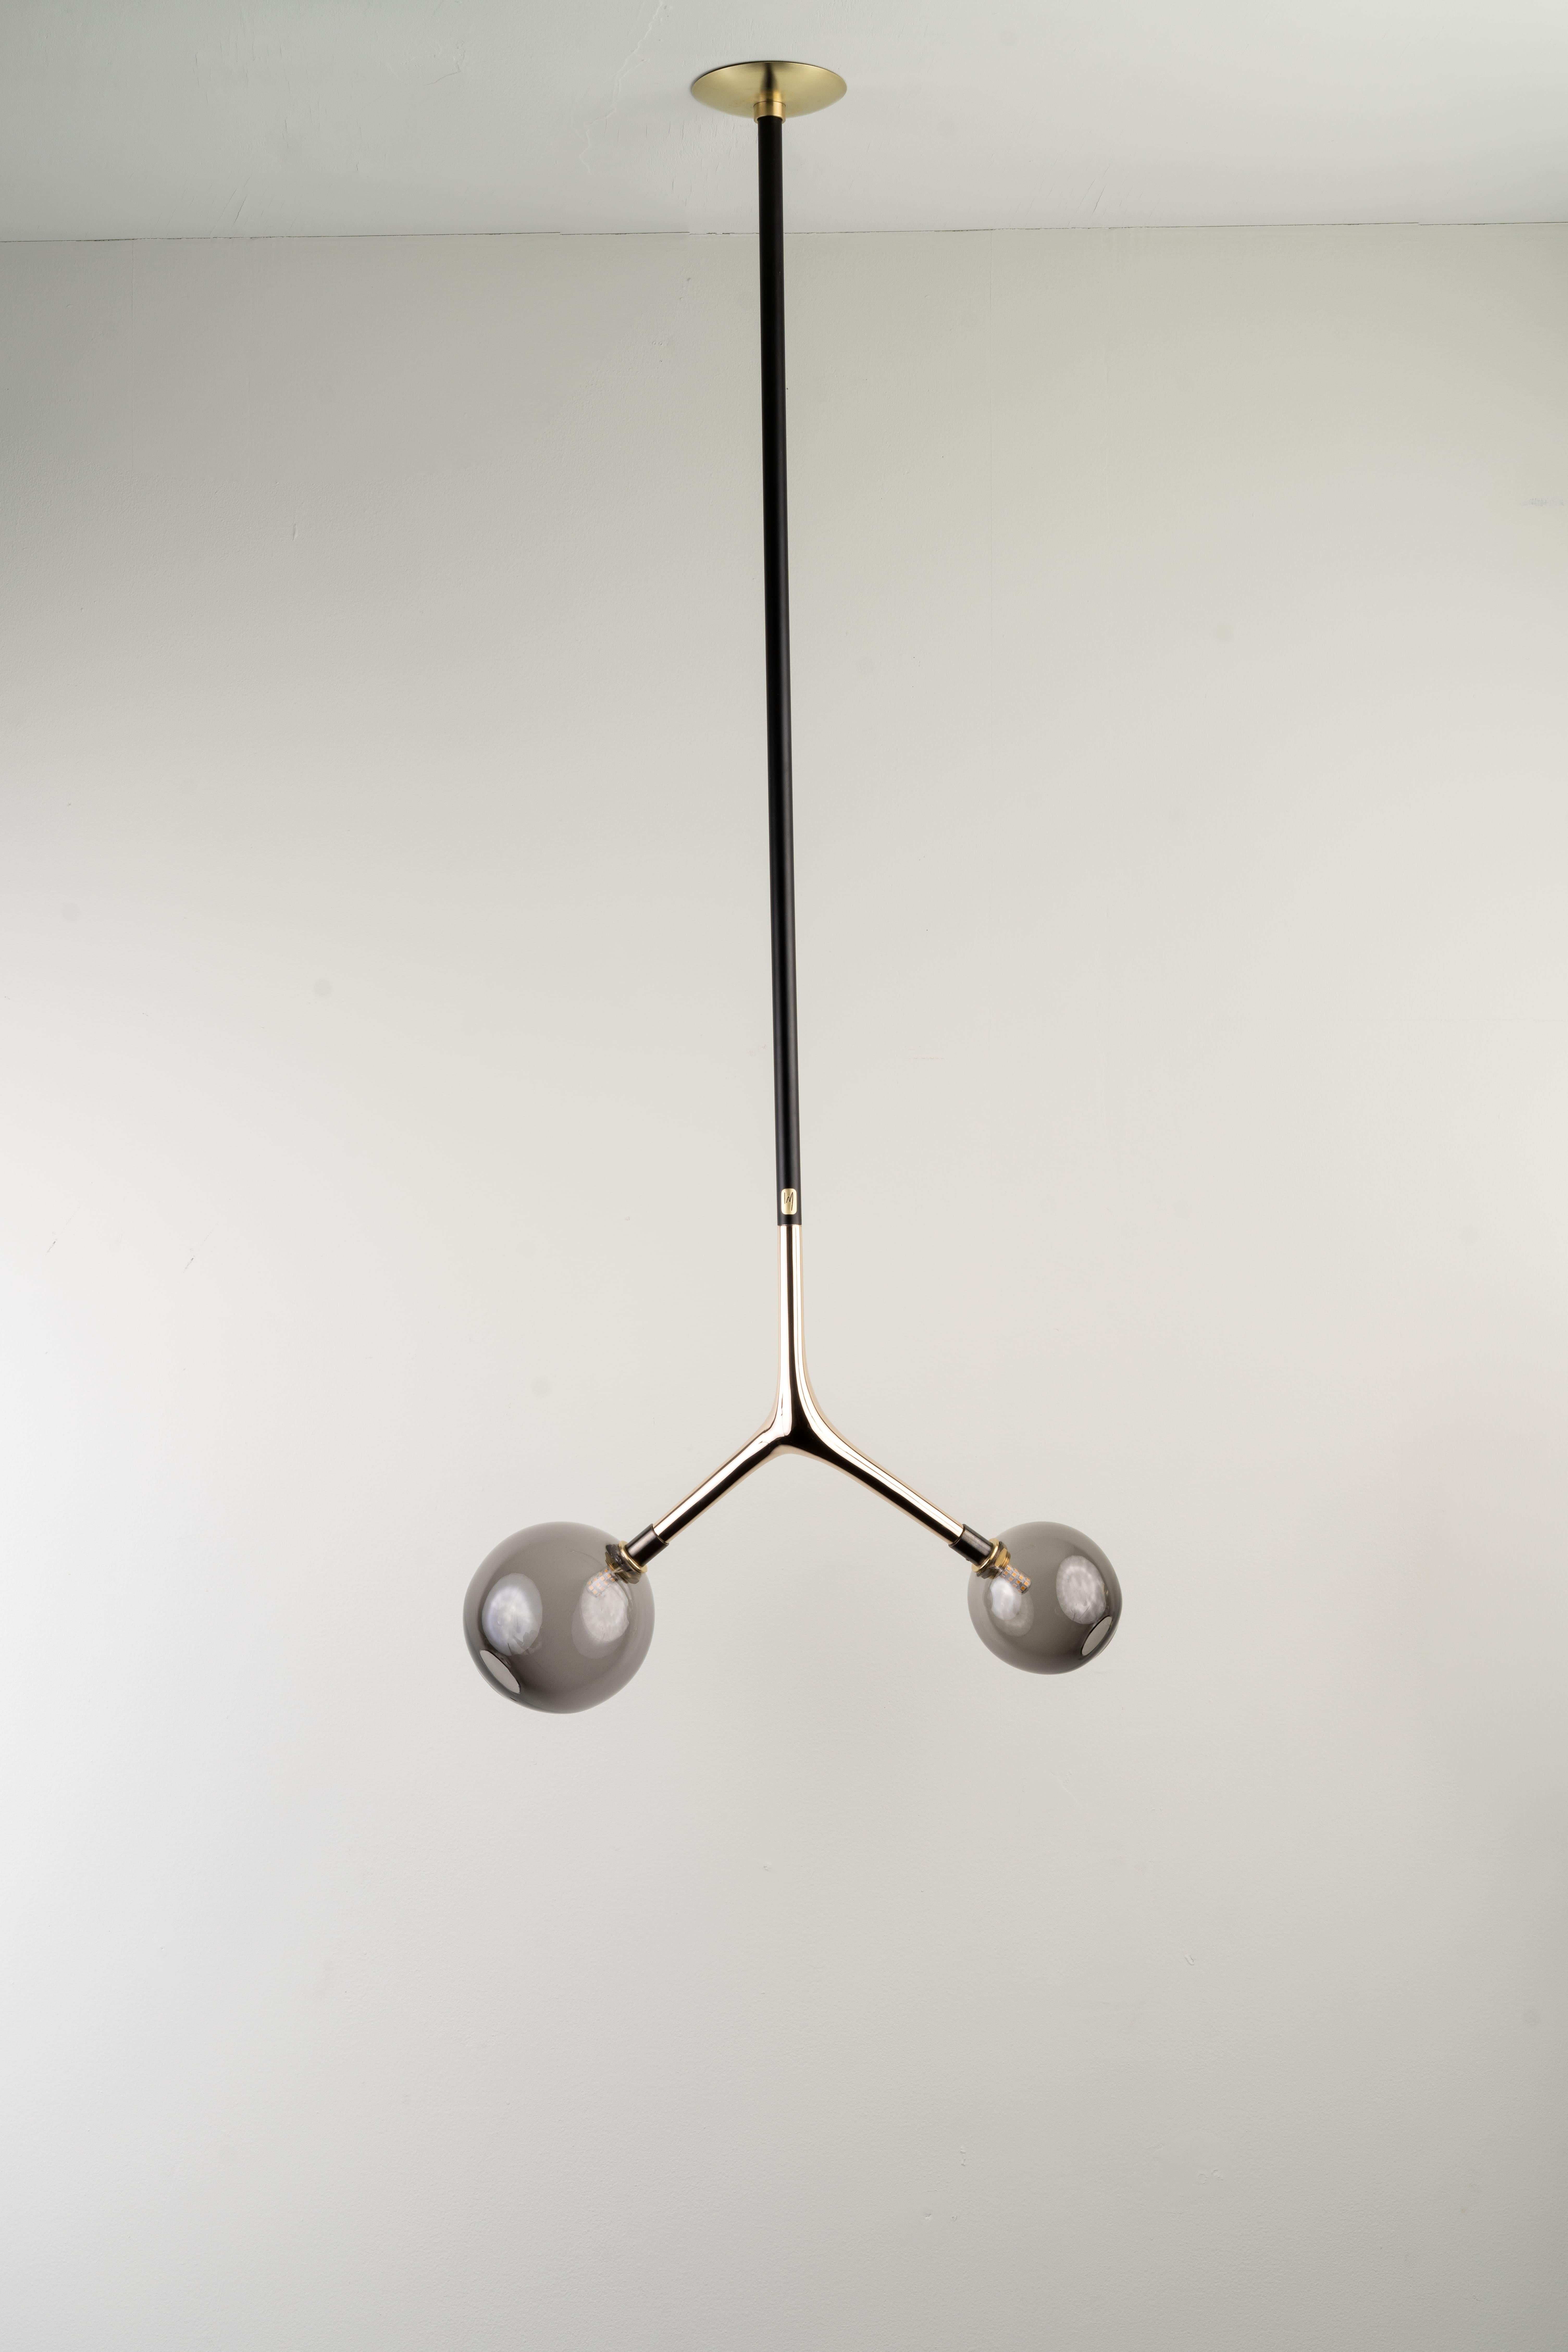 DUPLA hanging light was designed for the Mol collection by Mexican artist Isabel Moncada.

Dupla hangs from the ceiling just like a branch with its fruits. The customizable length options allow play with scale and composition. Dupla uses a low-watt